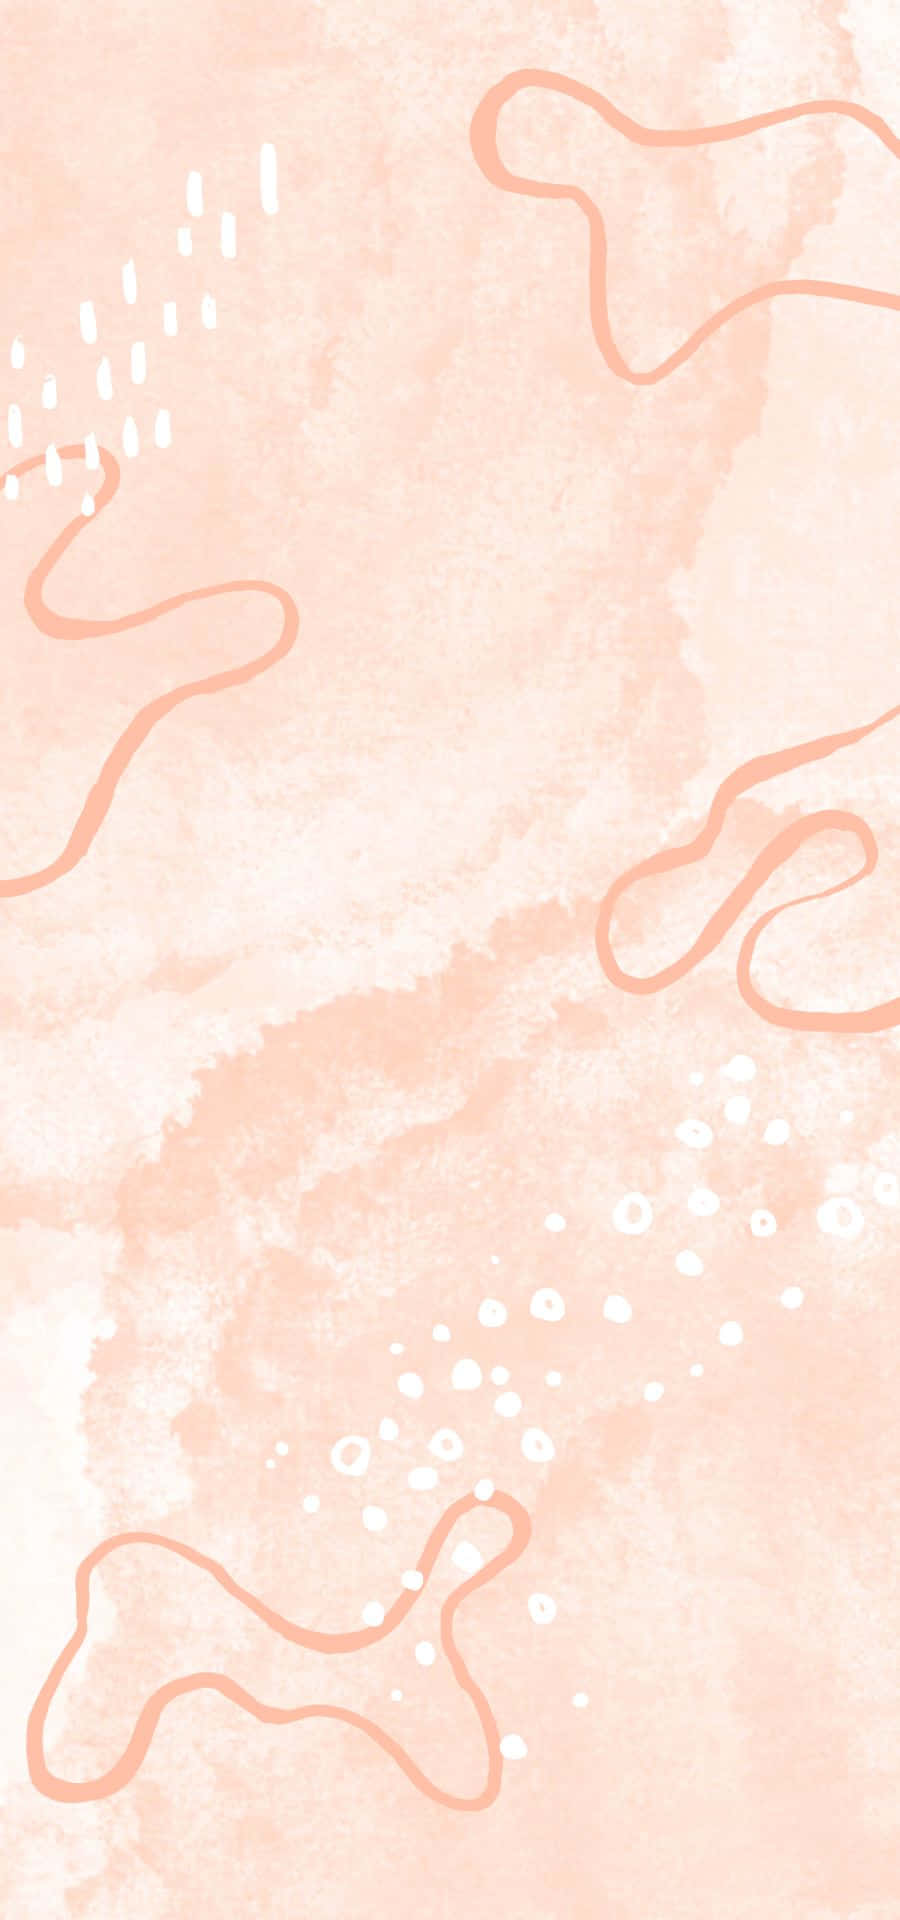 A Watercolor Background With A Pink And White Pattern